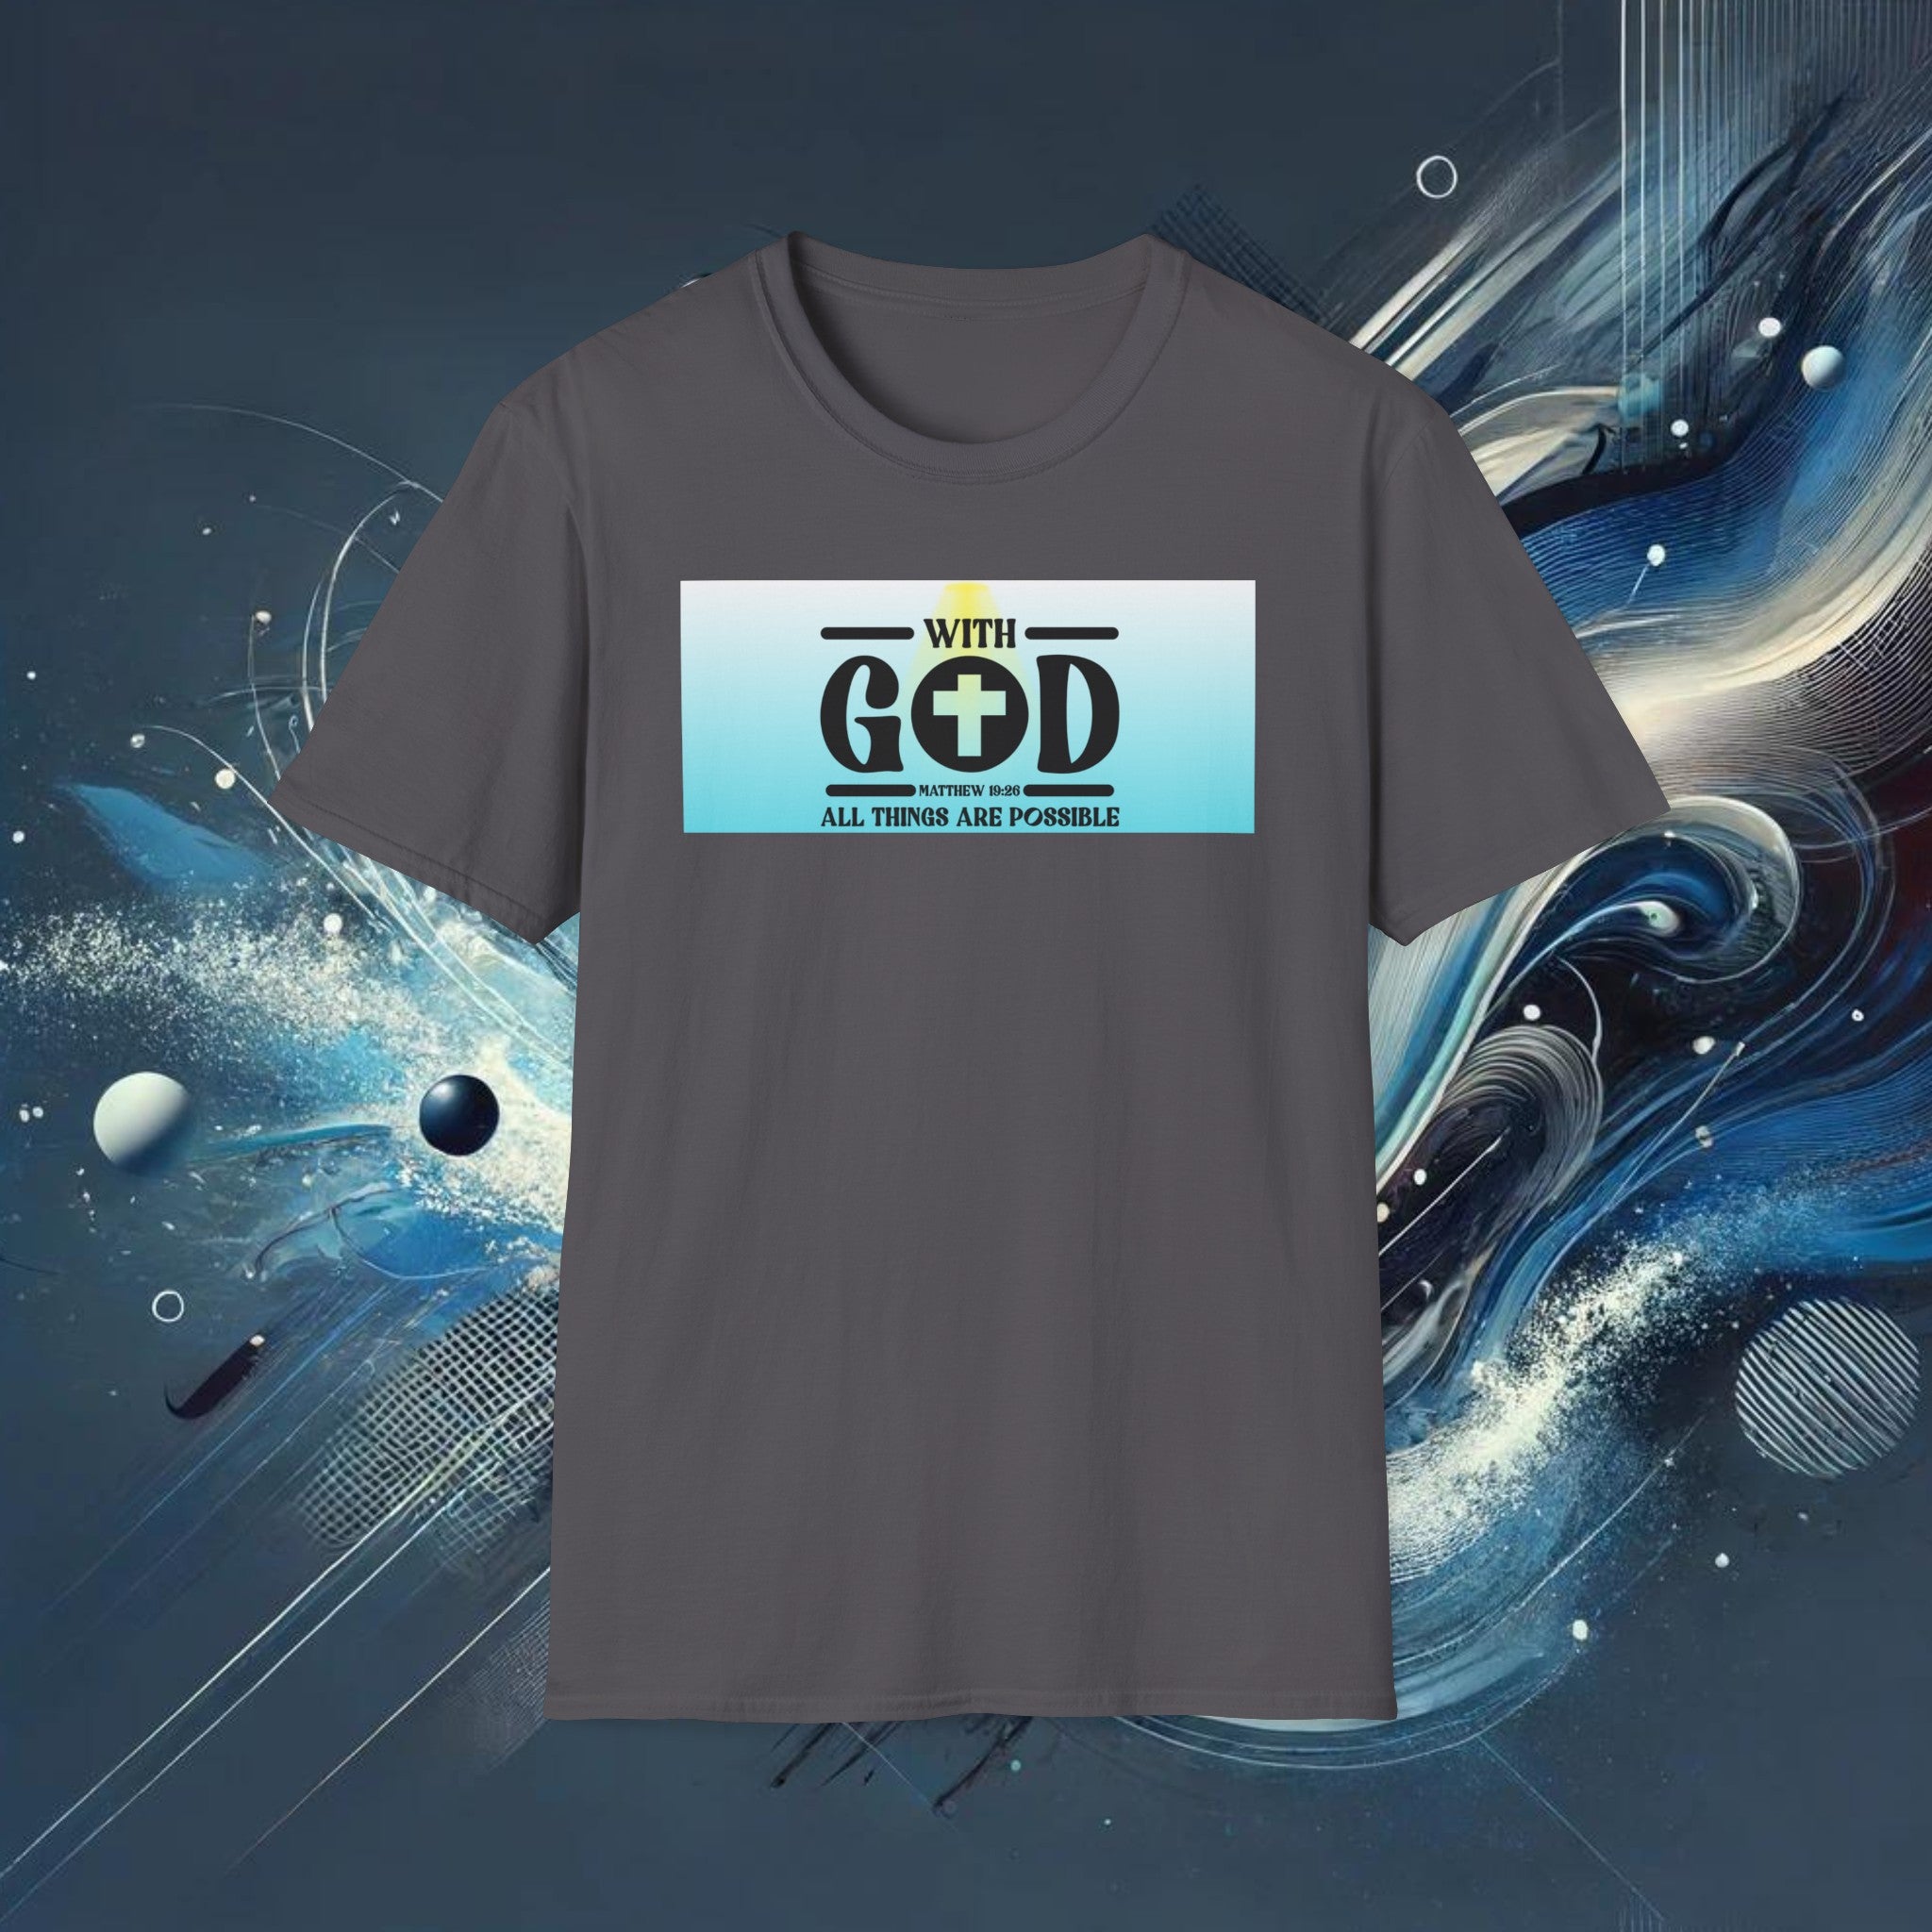 With God, All Things Are Possible T-Shirt